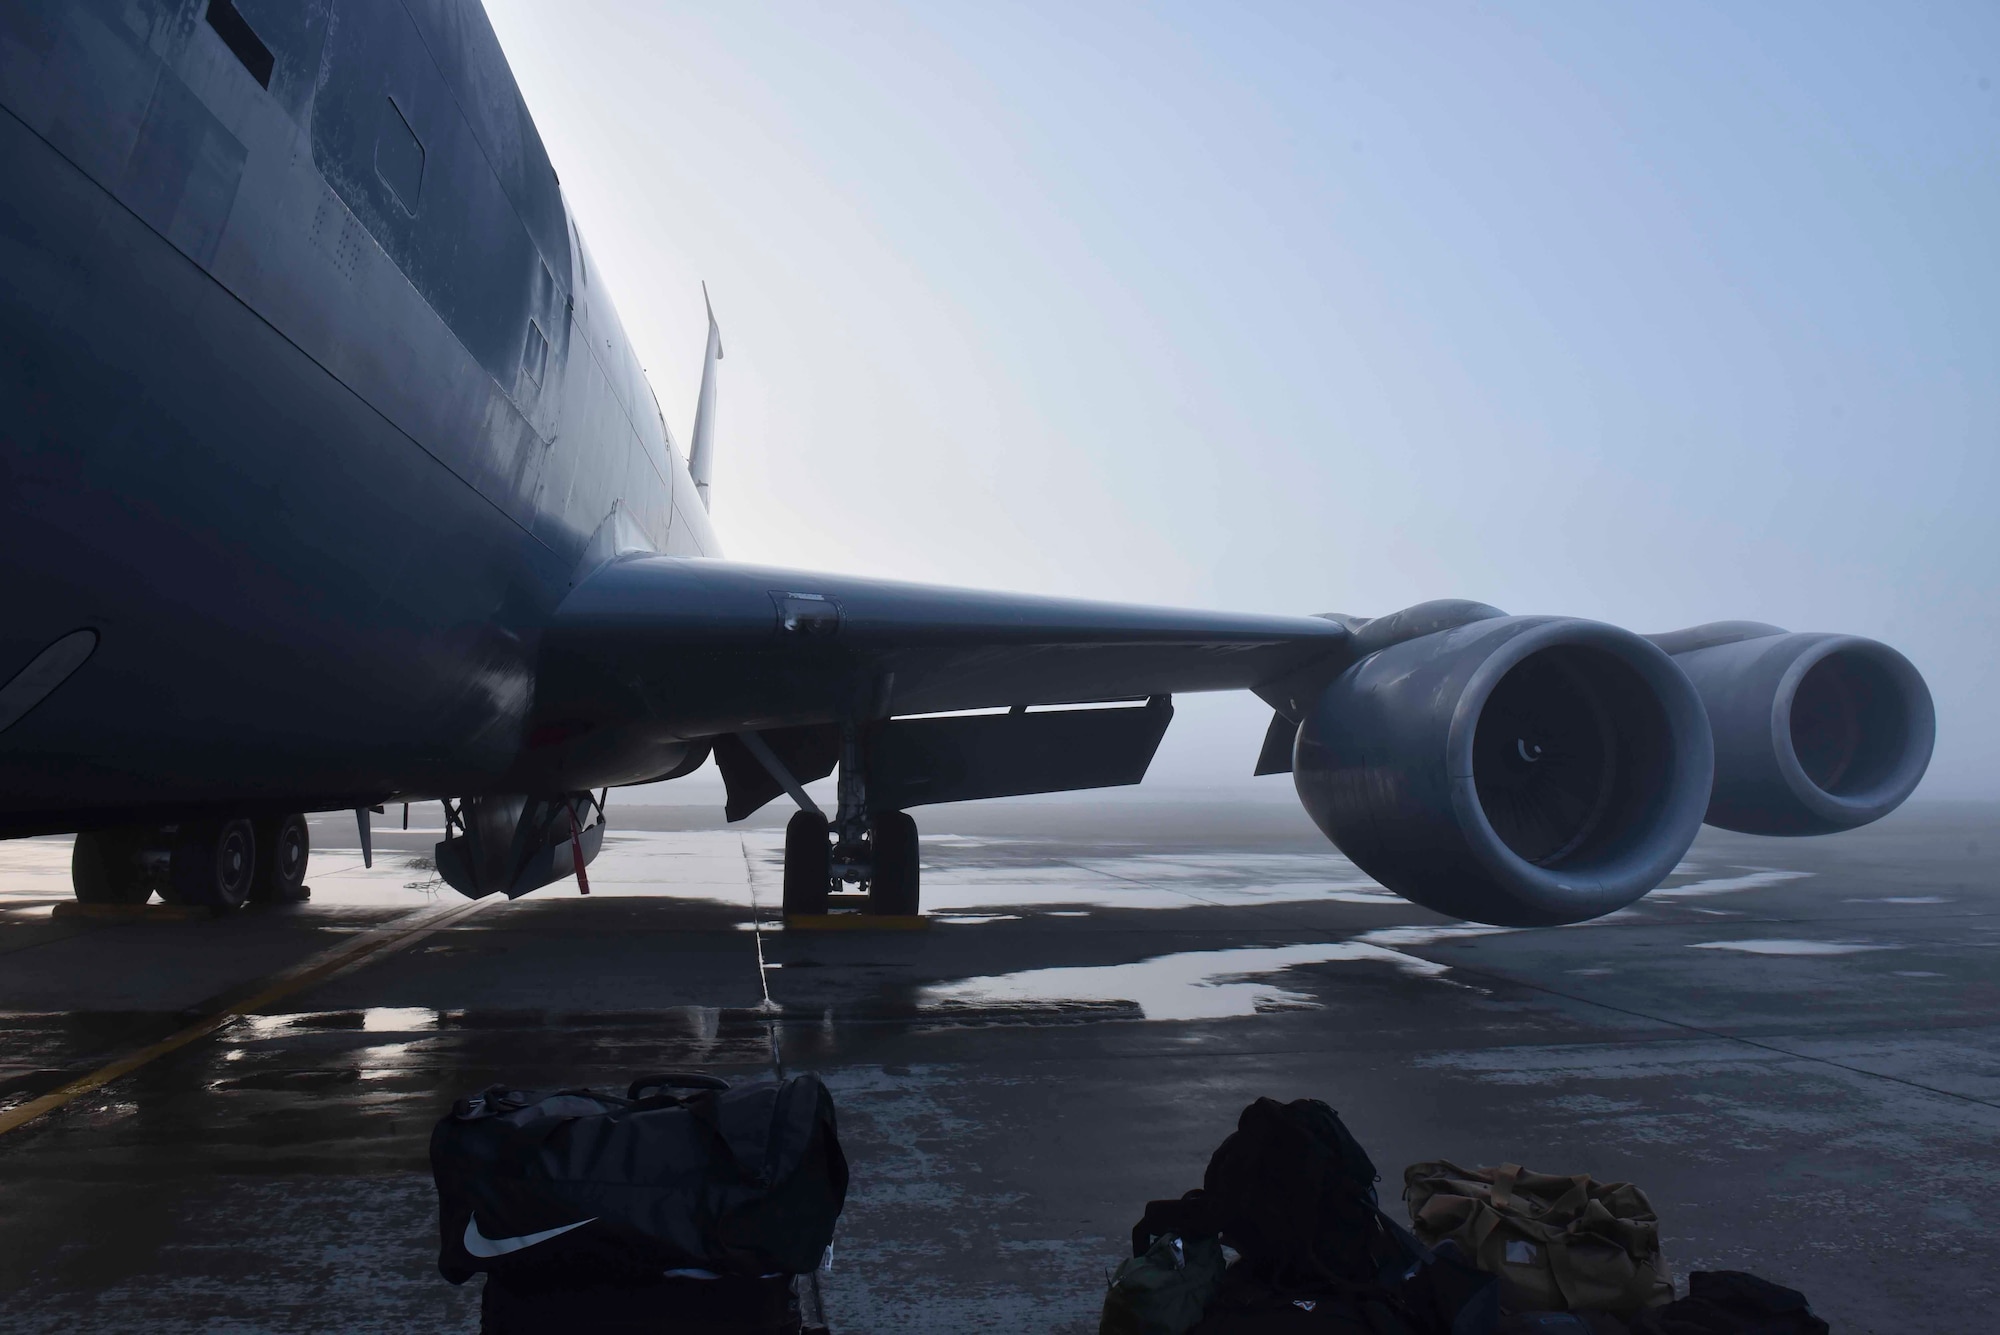 A KC-135 Stratotanker is parked on the flightline at Fairchild Air Force Base, Washington, Nov. 22, 2019. The KC-135 flew to Tinker Air Force Base, Oklahoma, for programmed depot maintenance and upgrades to the aircraft to increase functionality and longevity, and maintain safety of Team Fairchild’s Airmen. (U.S. Air Force photo by Airman Kiaundra Miller)